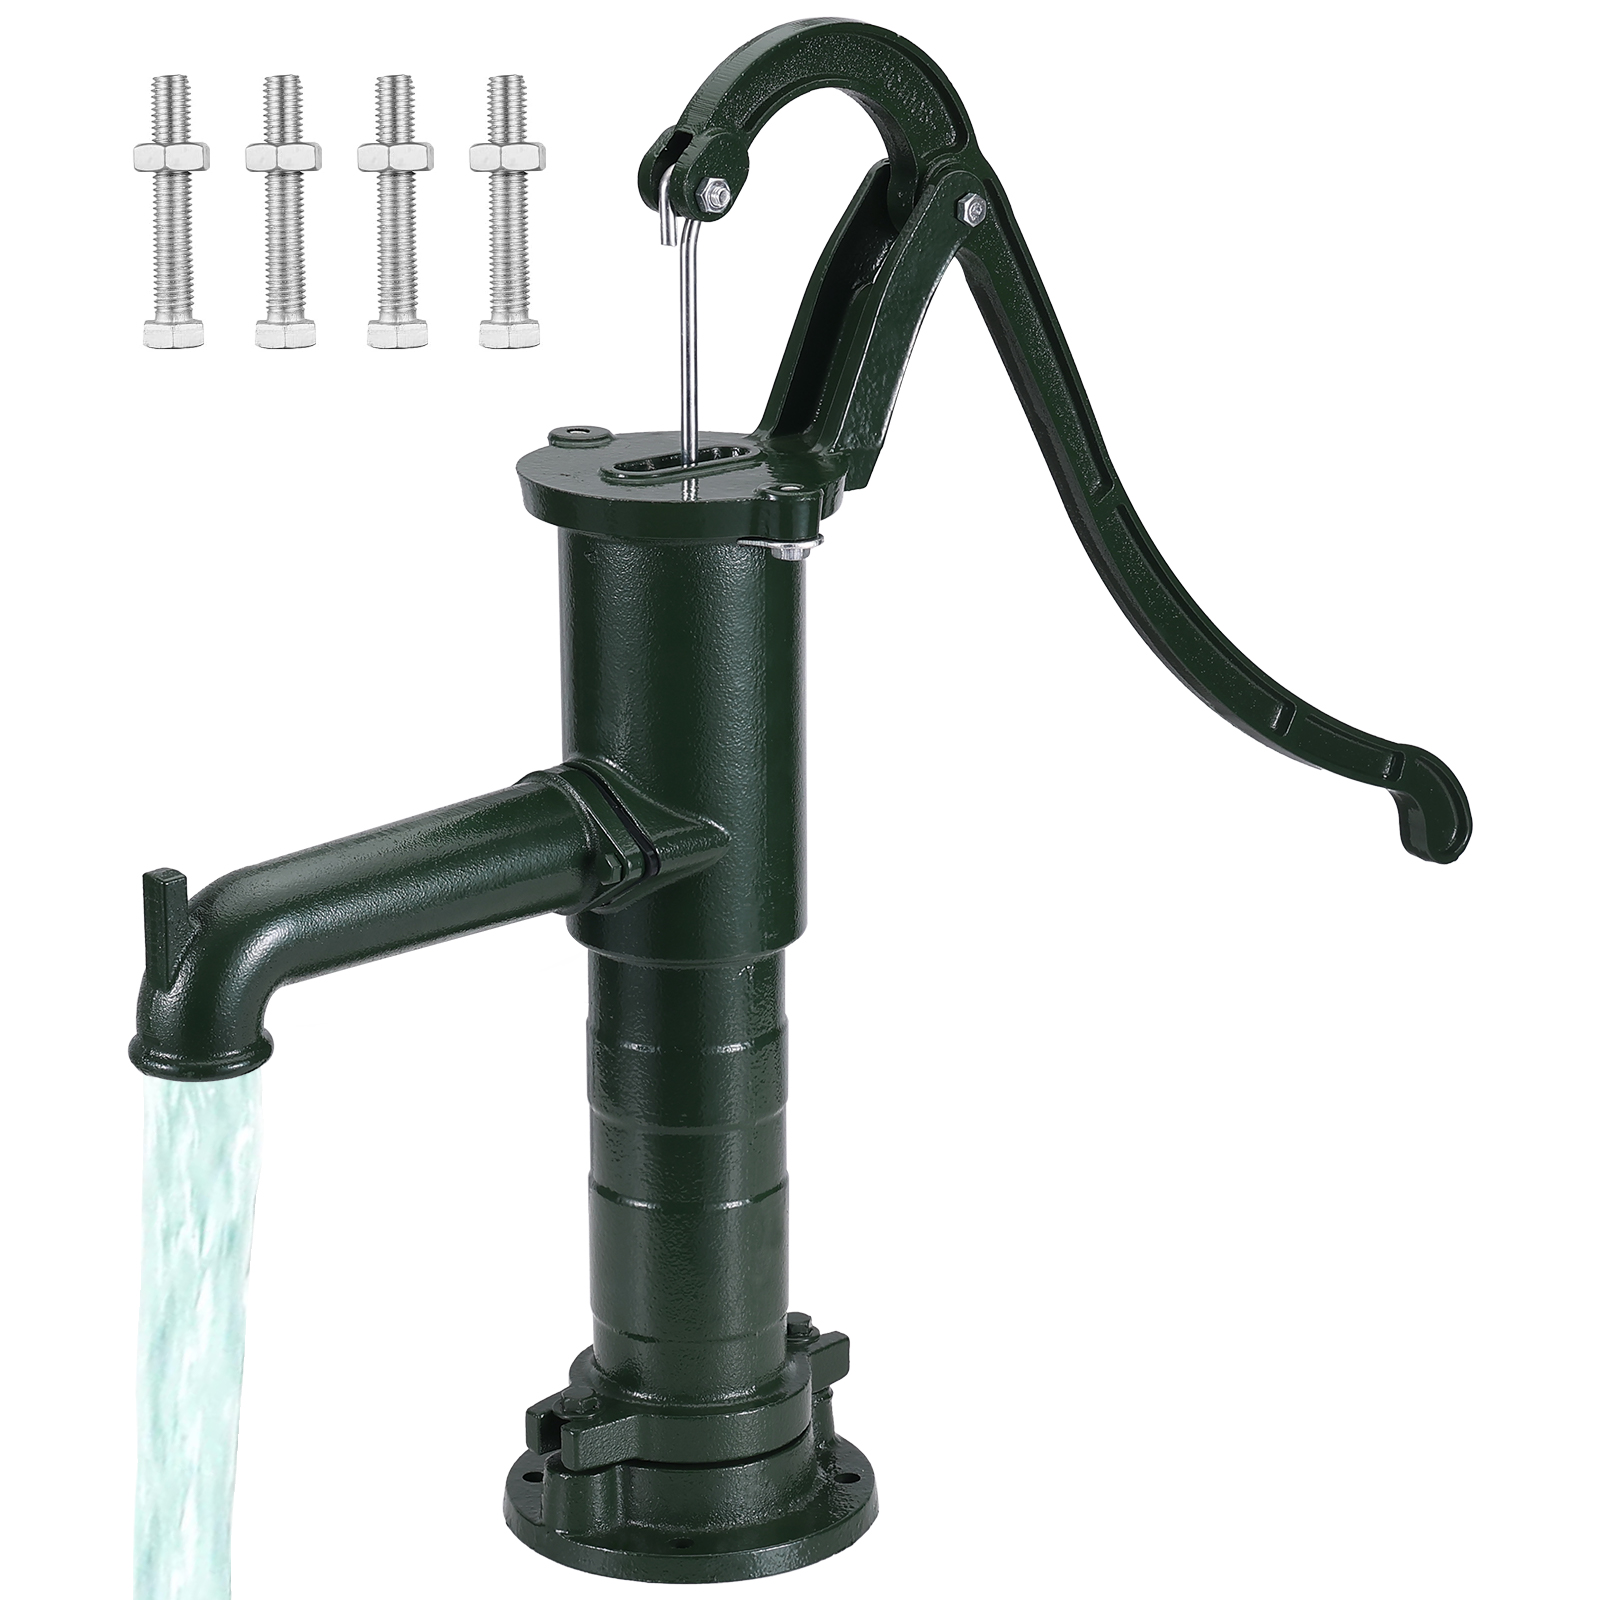 https://d2qc09rl1gfuof.cloudfront.net/product/YLSFB1AAUECL03ENE/hand-water-pump-m100-1.2.jpg